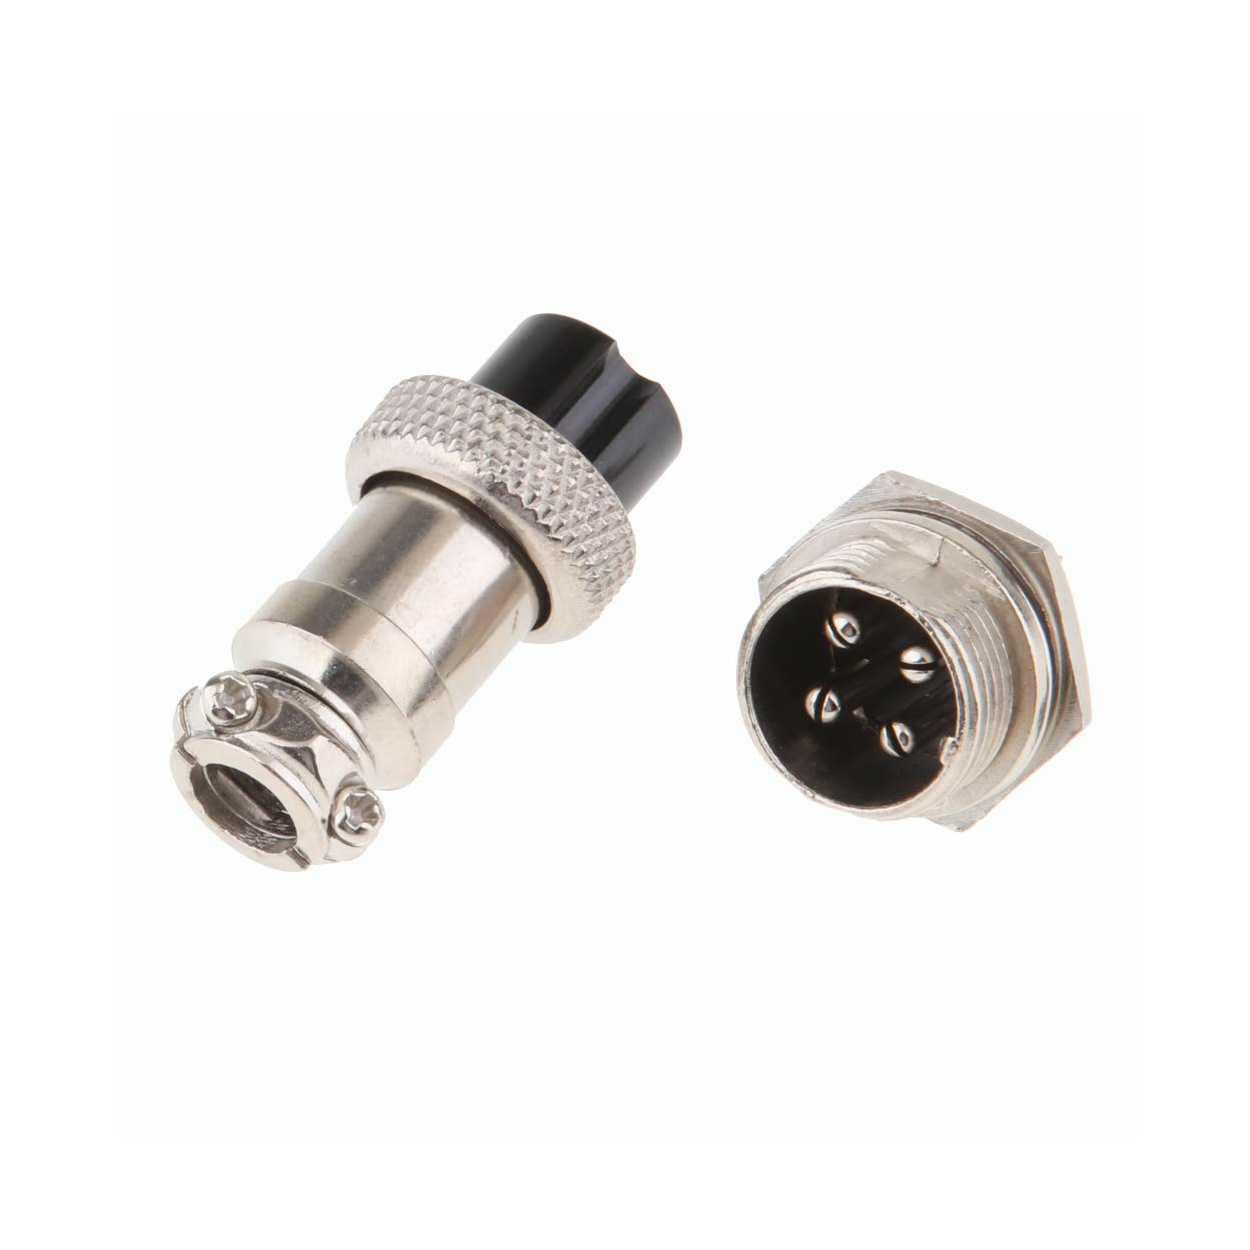 Probots Pin Gx Male To Female Aviation Plug Buy Online India